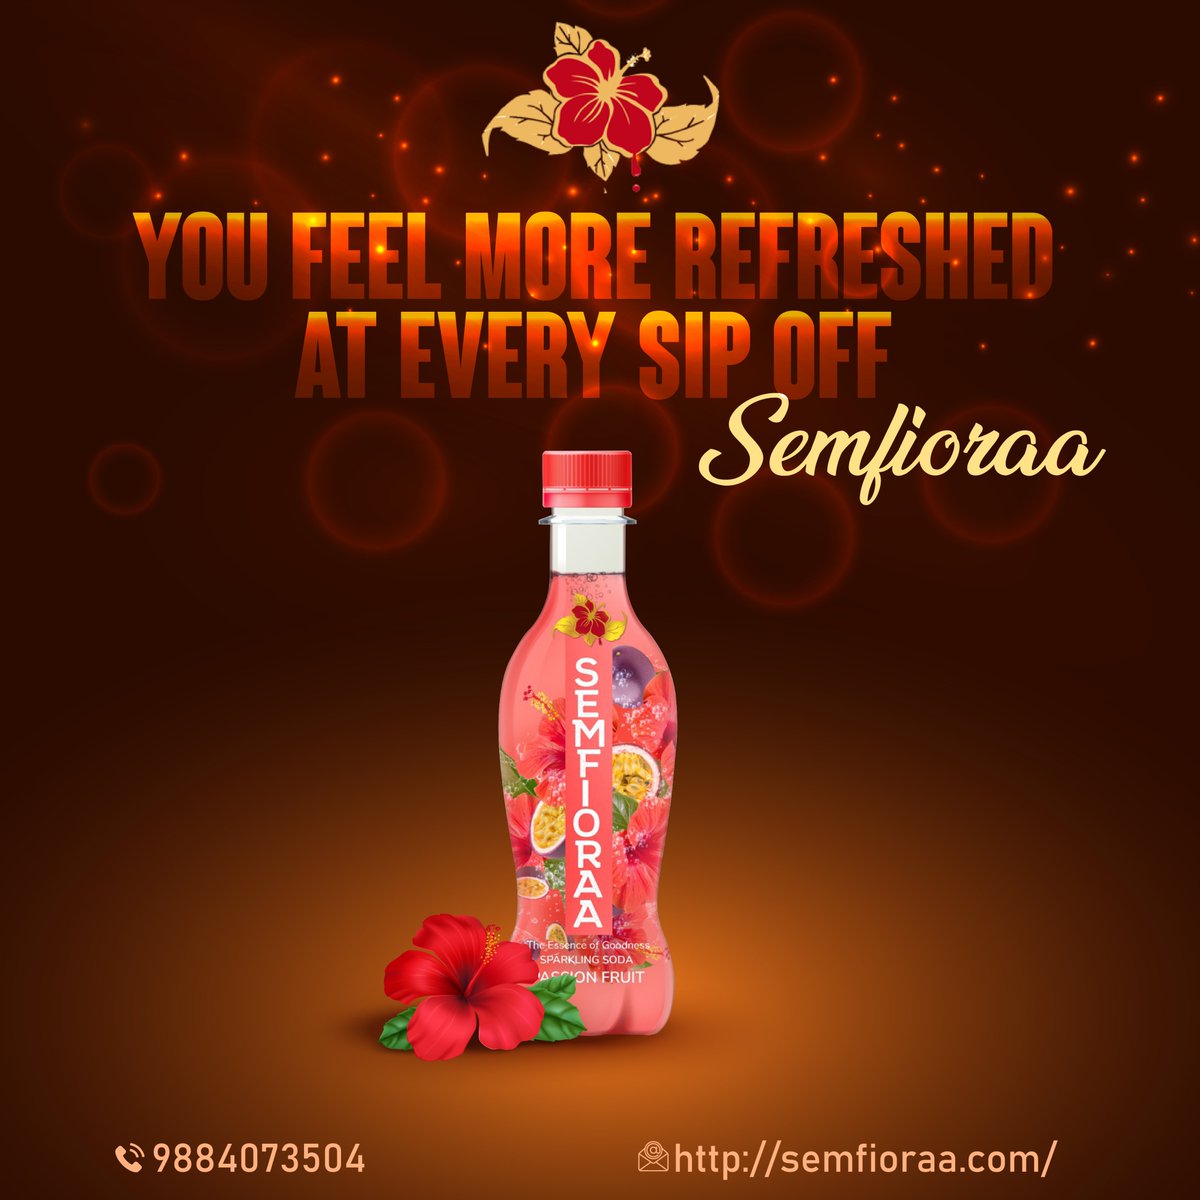 You Feel More Refreshed at Every Sip Of #Semfioraa.
semfioraa.com
#puducherry #cooldrinks #drinks #HealthyLiving  #healthy #healthylifestyle #healthydrink
 #floralcooldrink #hibiscusdrink #floraldrinks #juicecleanse #drinkspecials #drinklocally #drinkswithfriends